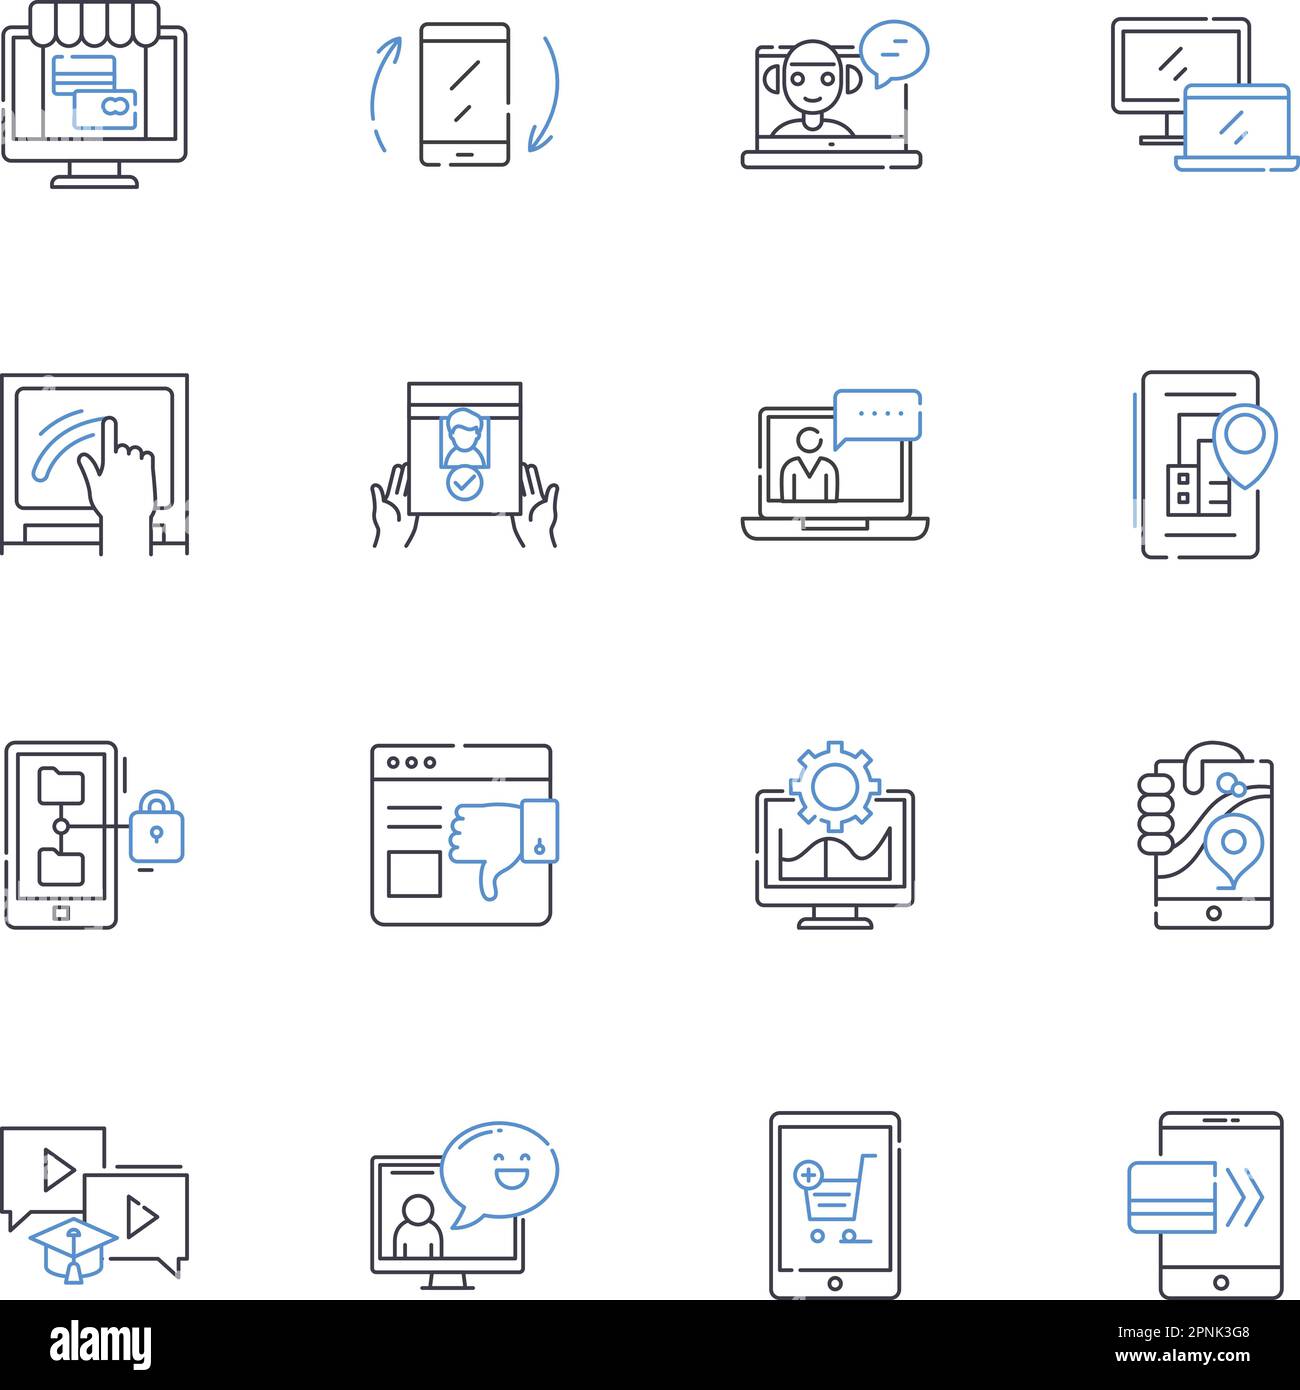 Command center line icons collection. Control, Hub, Monitor, Nerk, Command, Mission, Center vector and linear illustration. Operations,Infrastructure Stock Vector